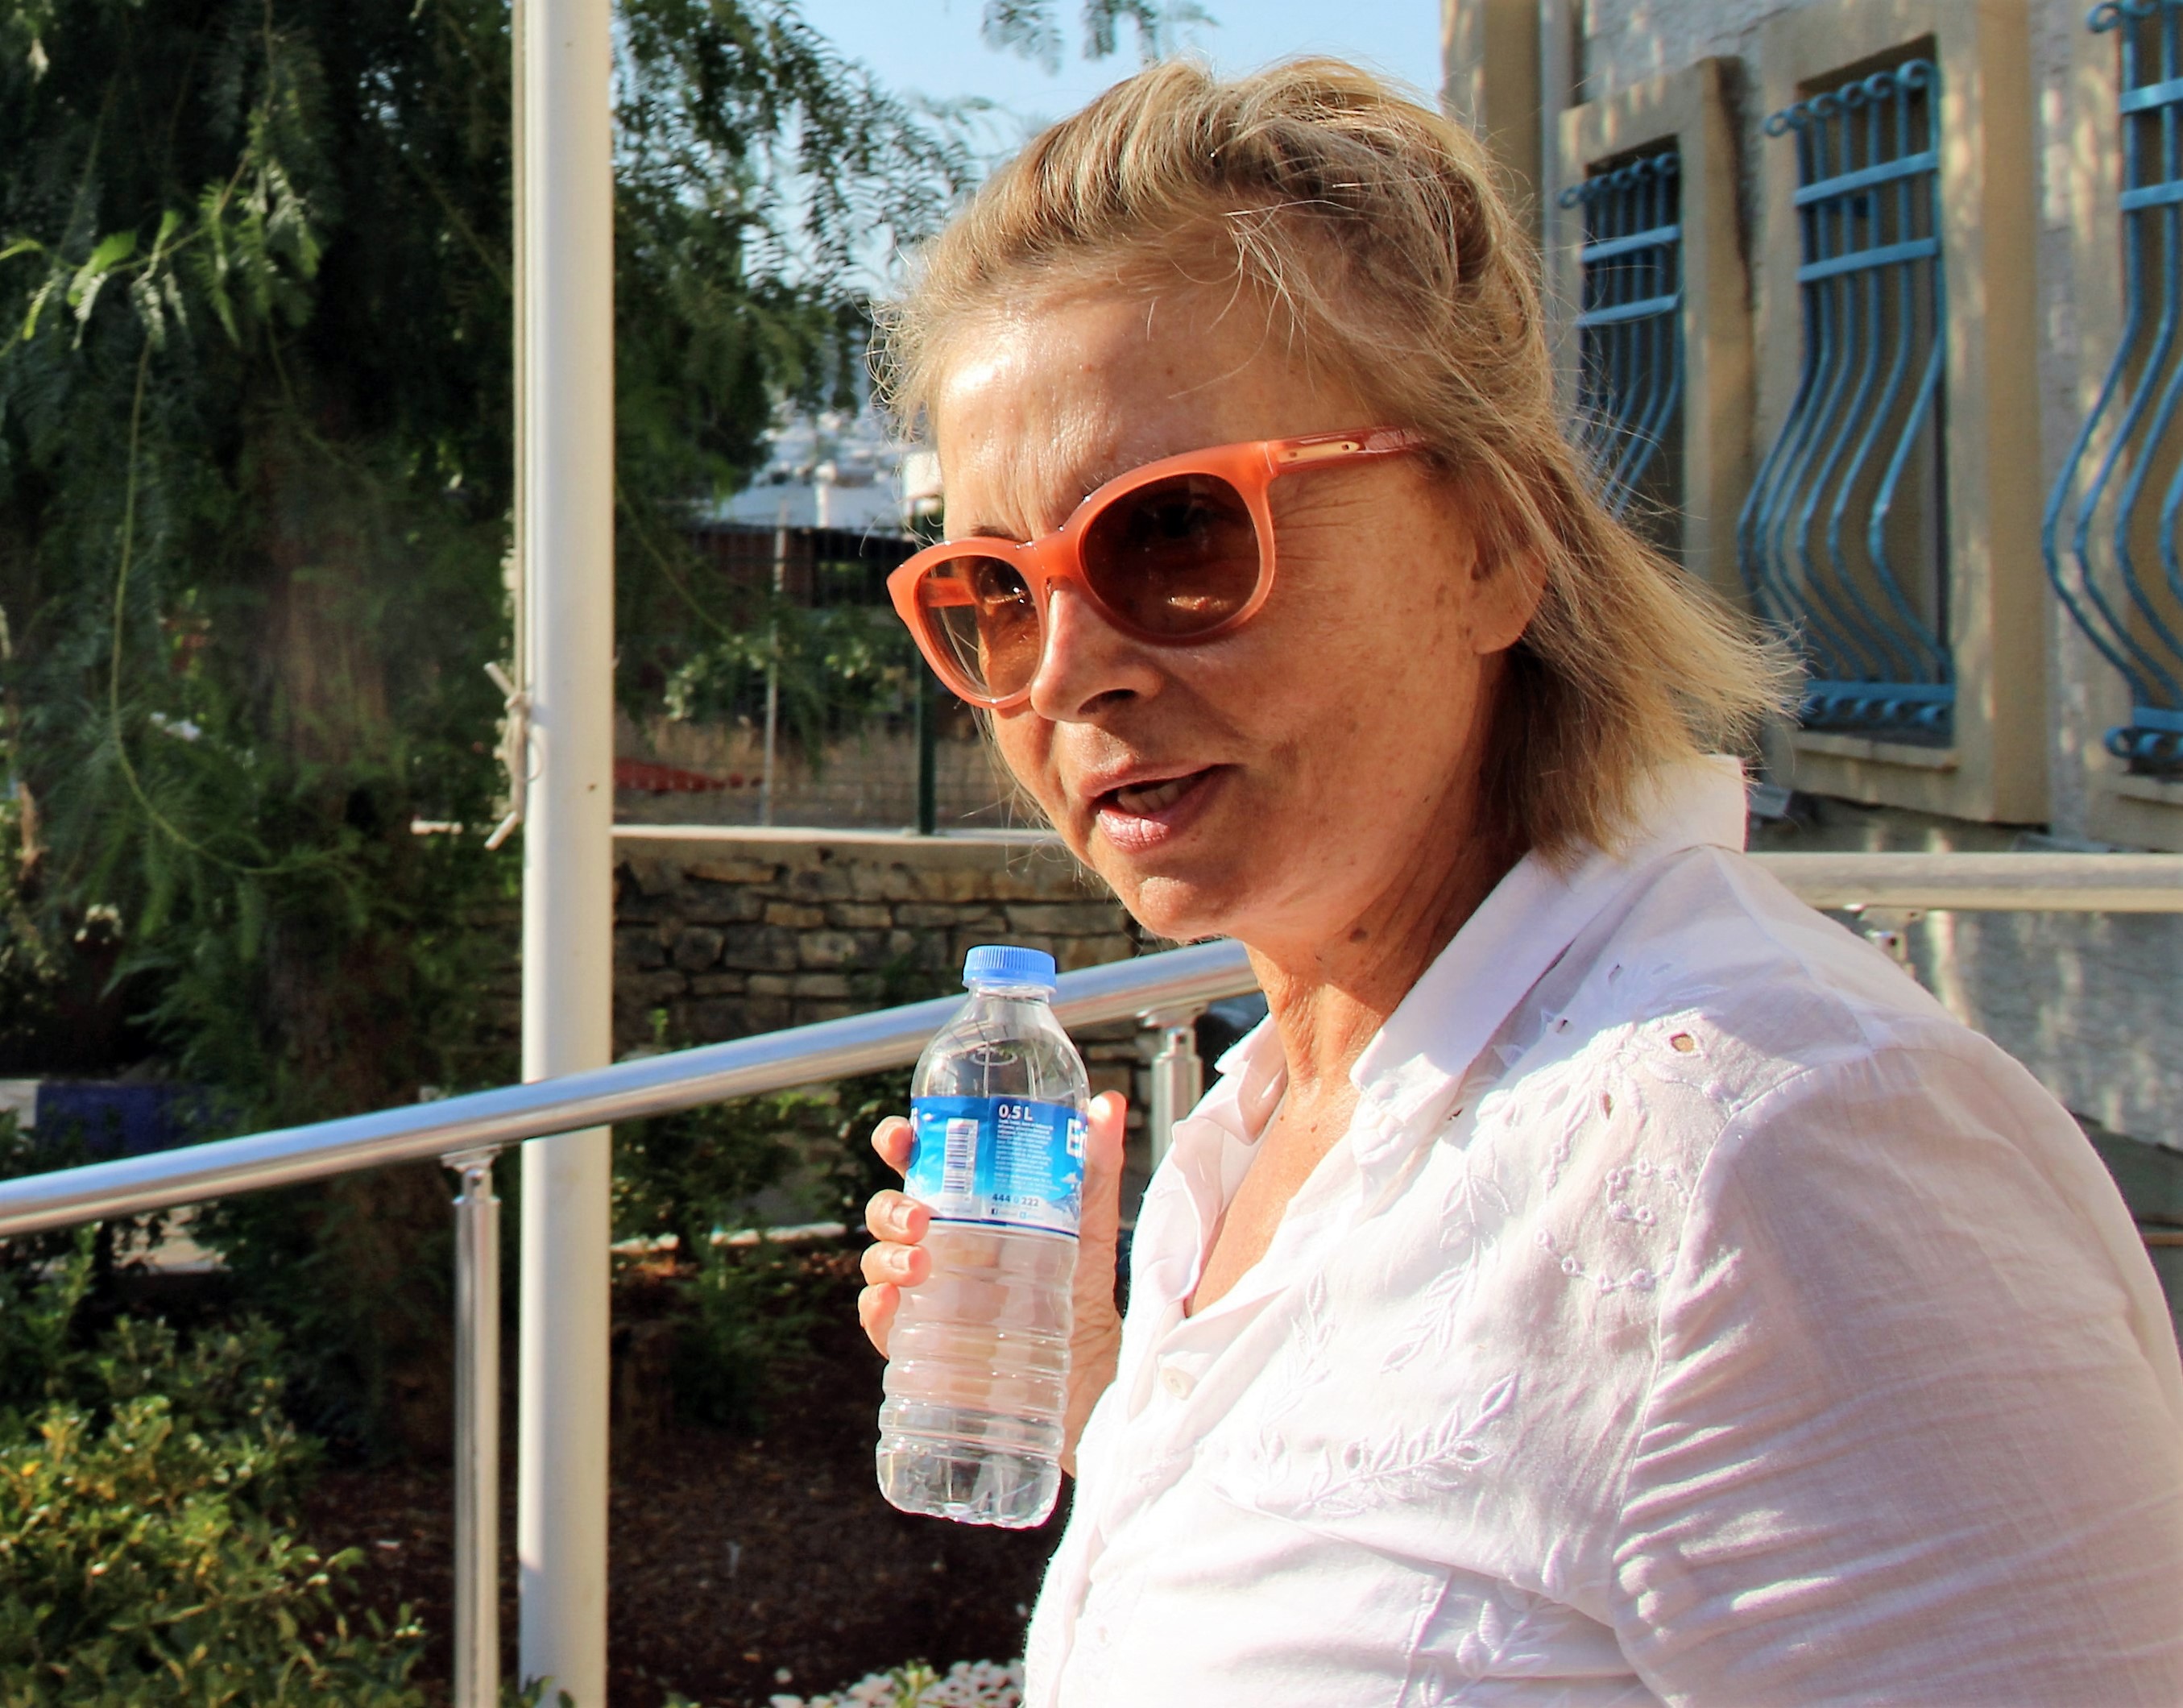 This picture obtained from the Ihlas News Agency shows journalist Nazli Ilicak posing in Mugla on July 26, 2016 after being detained by Turkish police.
Turkish authorities on July 26 detained a veteran female reporter as part of the investigation into the failed July 15 coup after issuing warrants for over 40 journalists in a move that caused international concern. Nazli Ilicak was on a list of 42 journalists sought for arrest issued by Istanbul prosecutors early on July 25.  / AFP / IHLAS NEWS AGENCY / IHLAS NEWS AGENCY        (Photo credit should read IHLAS NEWS AGENCY/AFP/Getty Images)